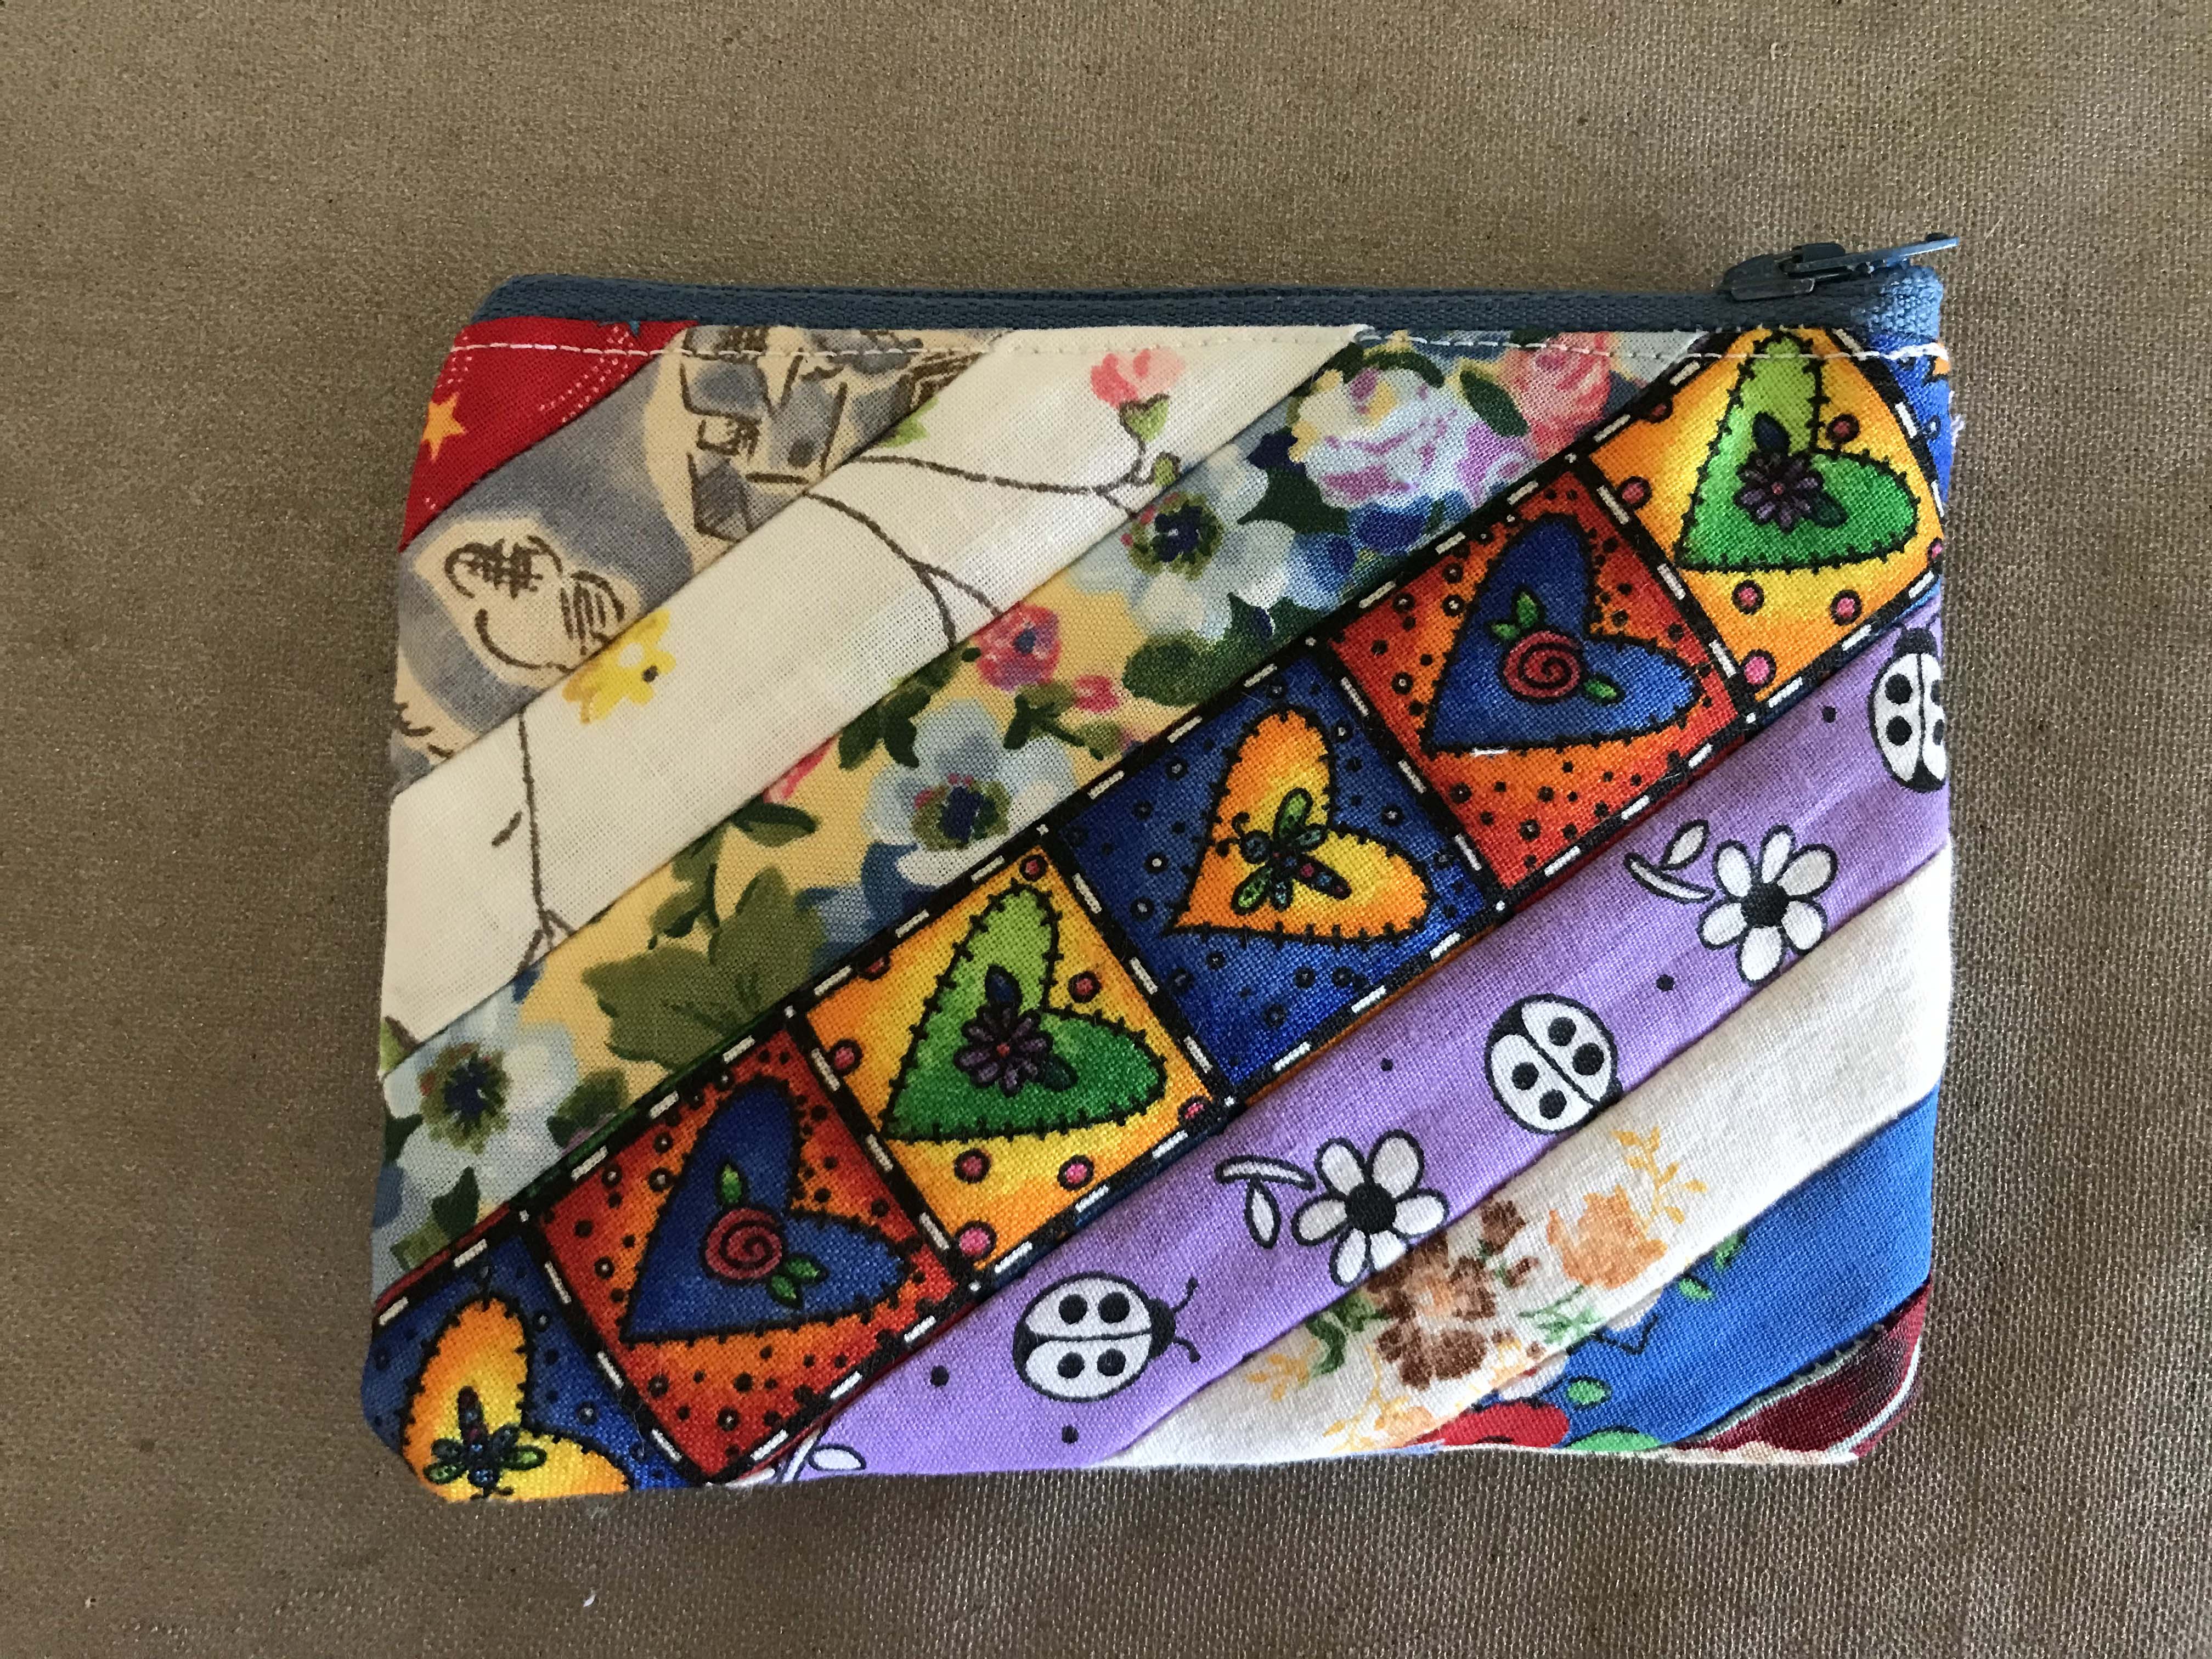 Sew Zipper Pouch (Credit Card Size) - Free Sewing Pattern